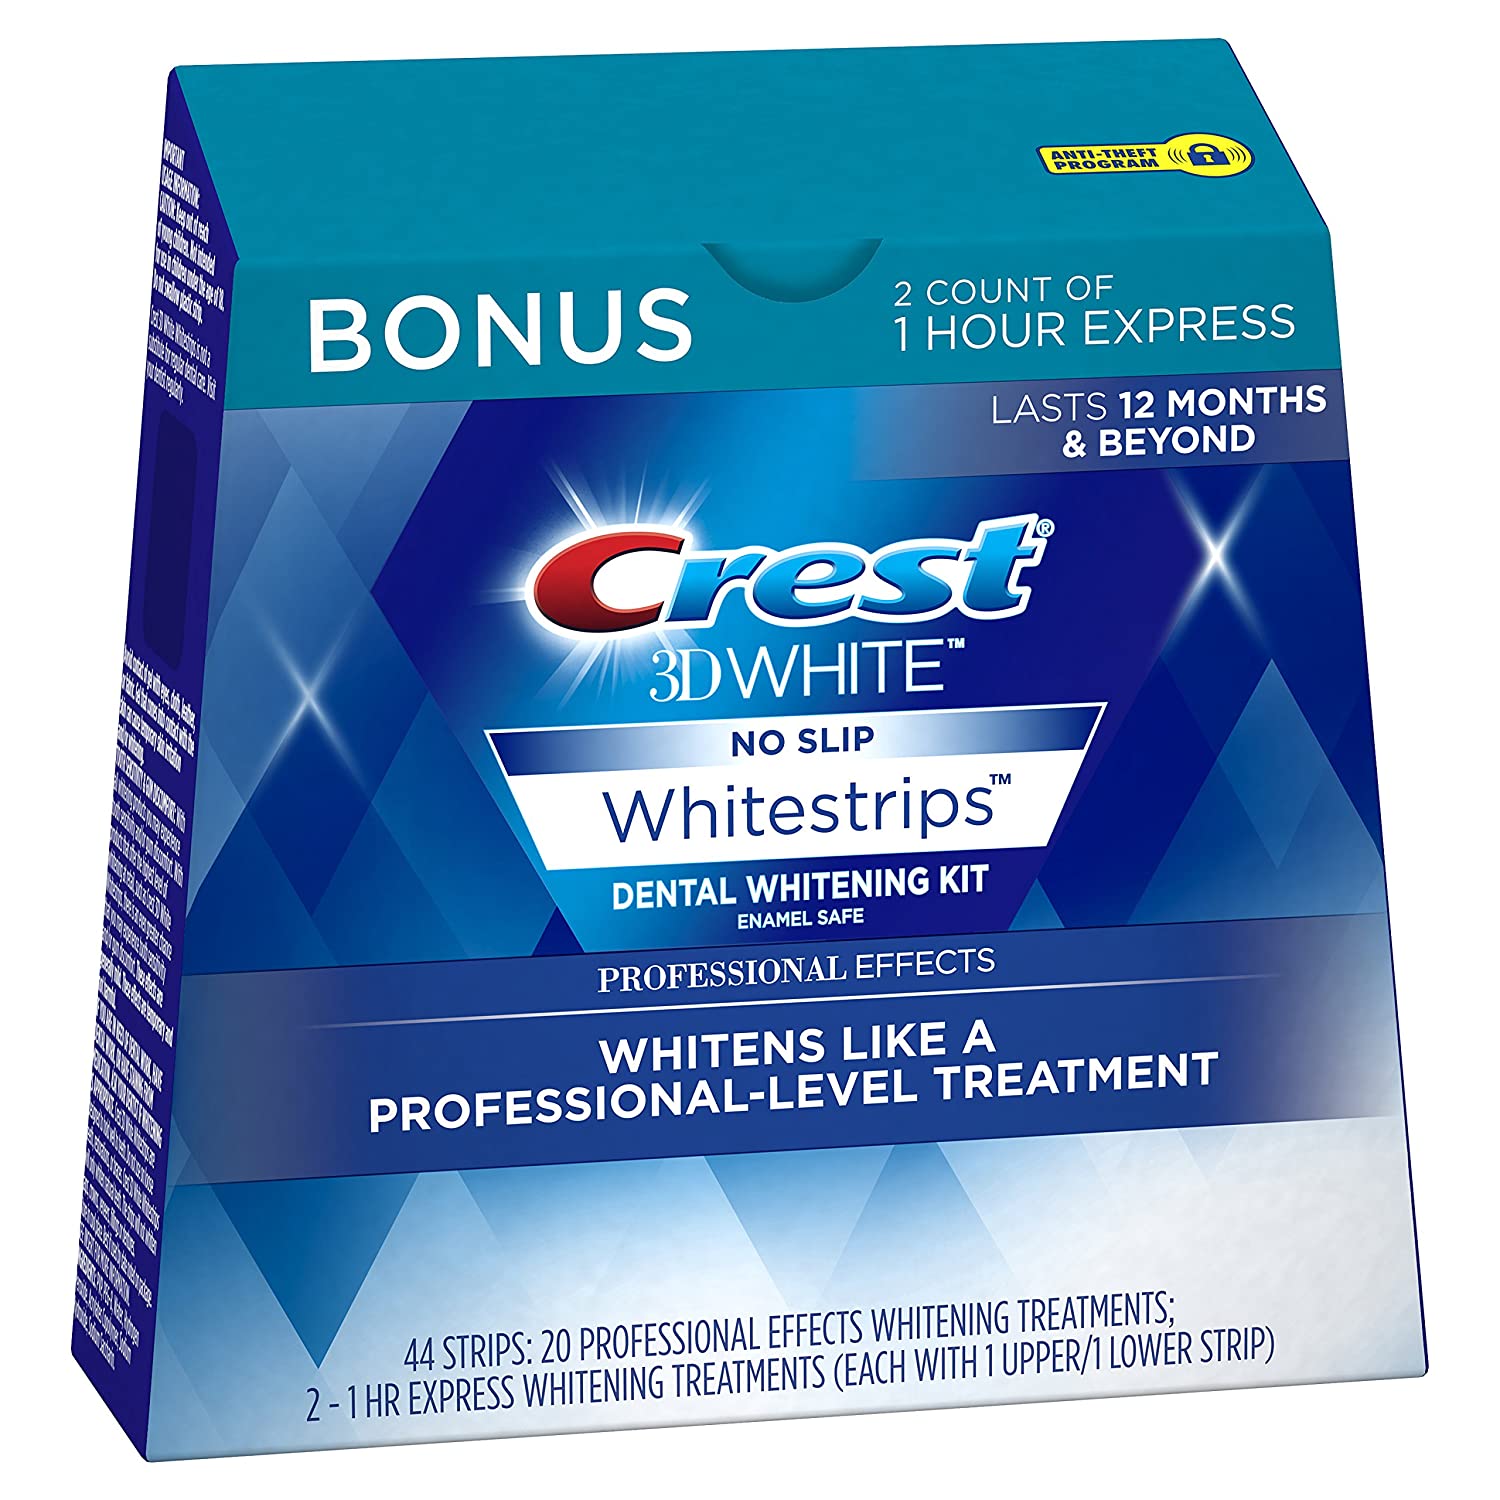 Crest 3D White Professional Effects Whitestrips 20 Treatments-1